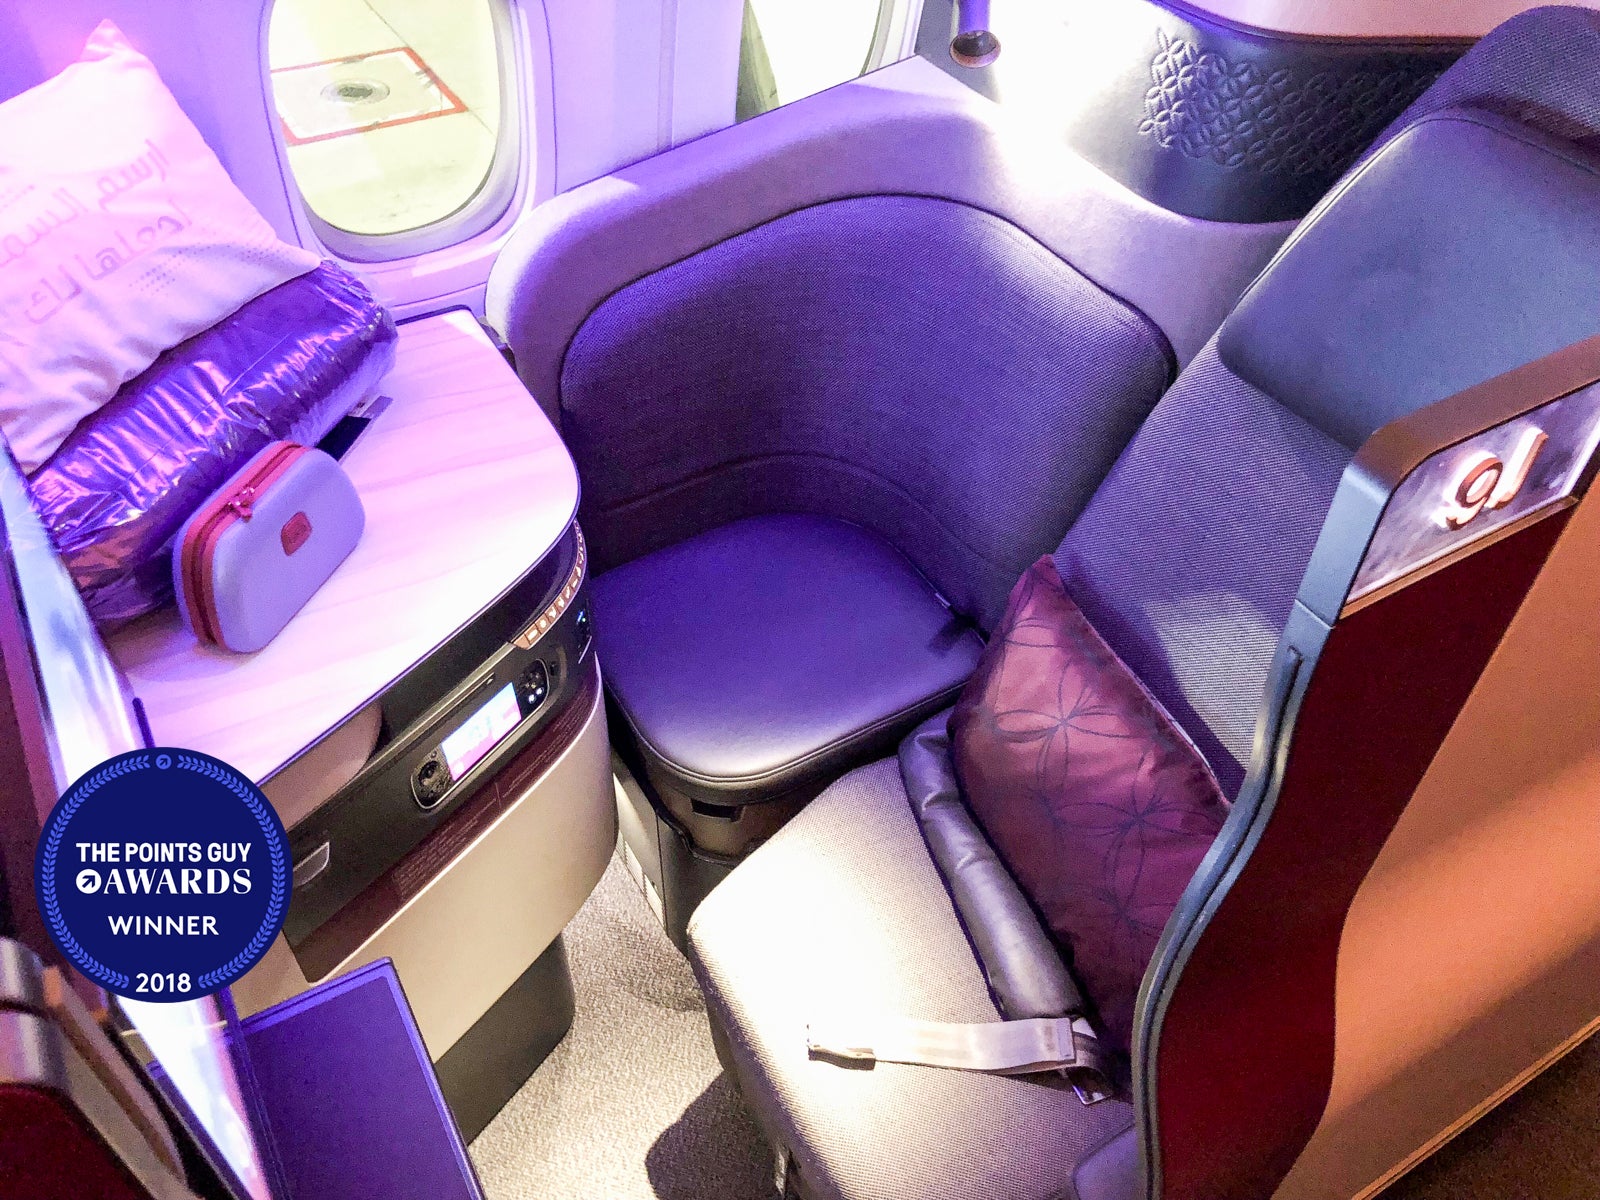 REVIEW: This isn't any short haul flightthis is a Qatar Airways